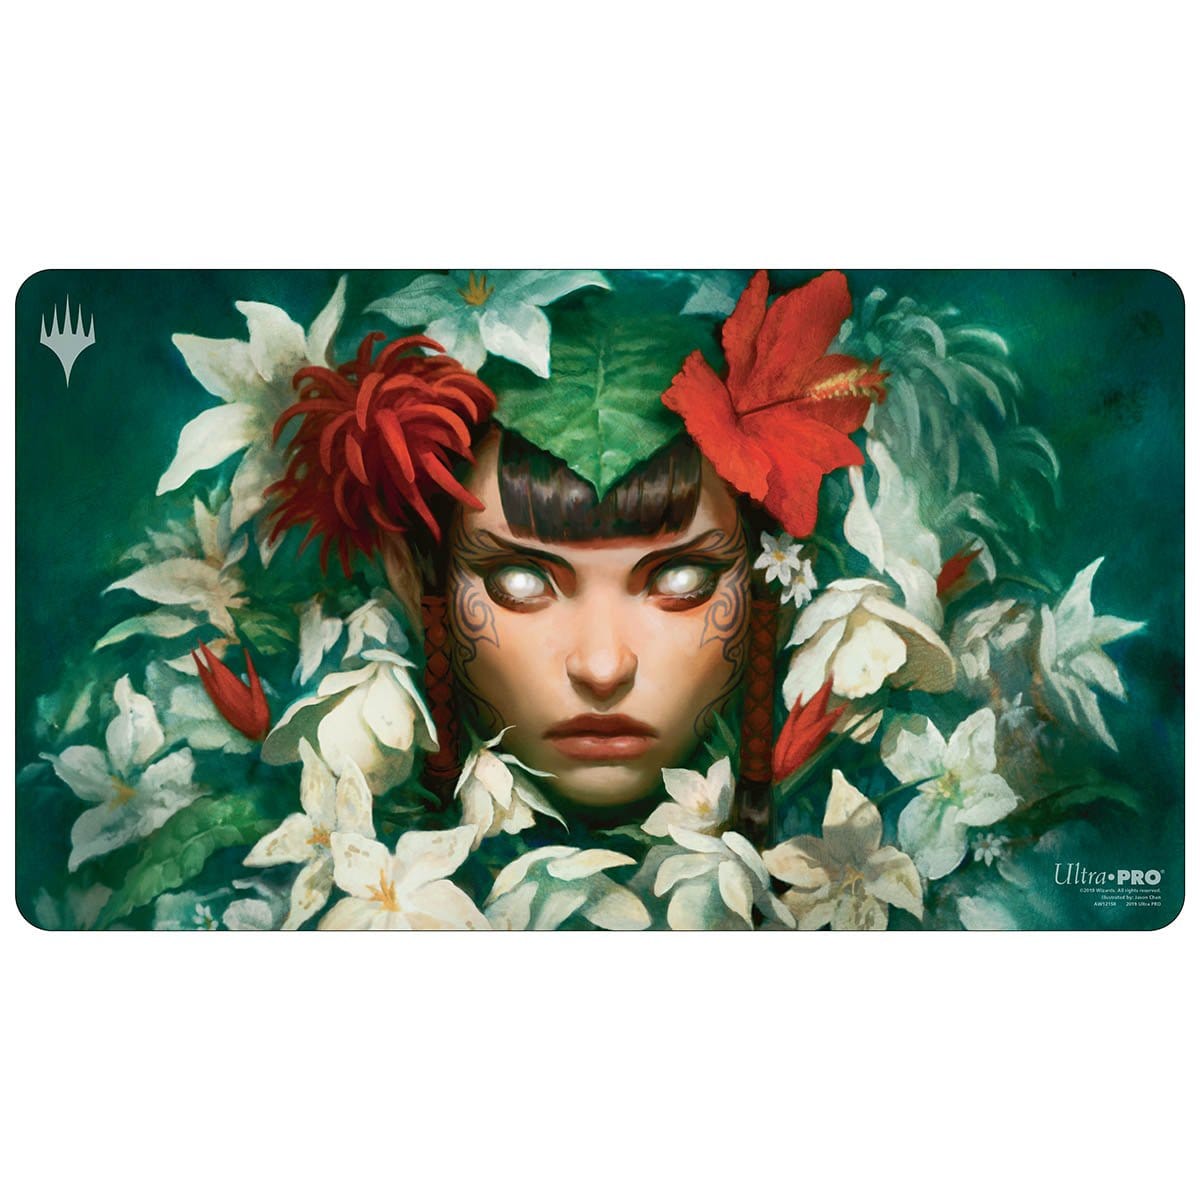 Mayael the Anima Playmat - Playmat - Original Magic Art - Accessories for Magic the Gathering and other card games